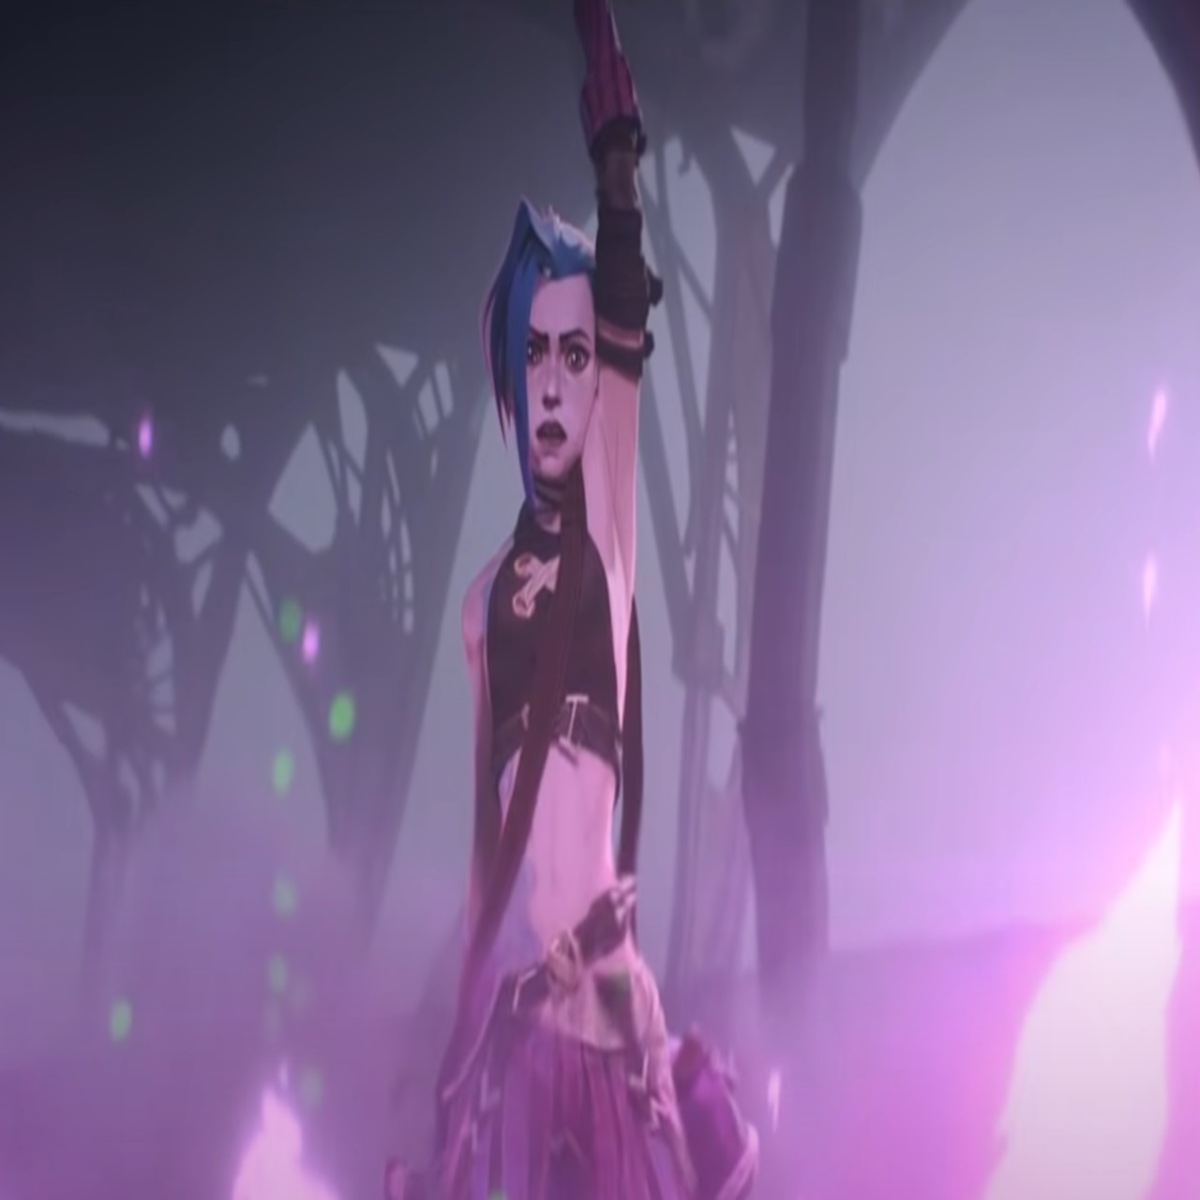 Why Jinx From Netflix's Arcane Sounds So Familiar